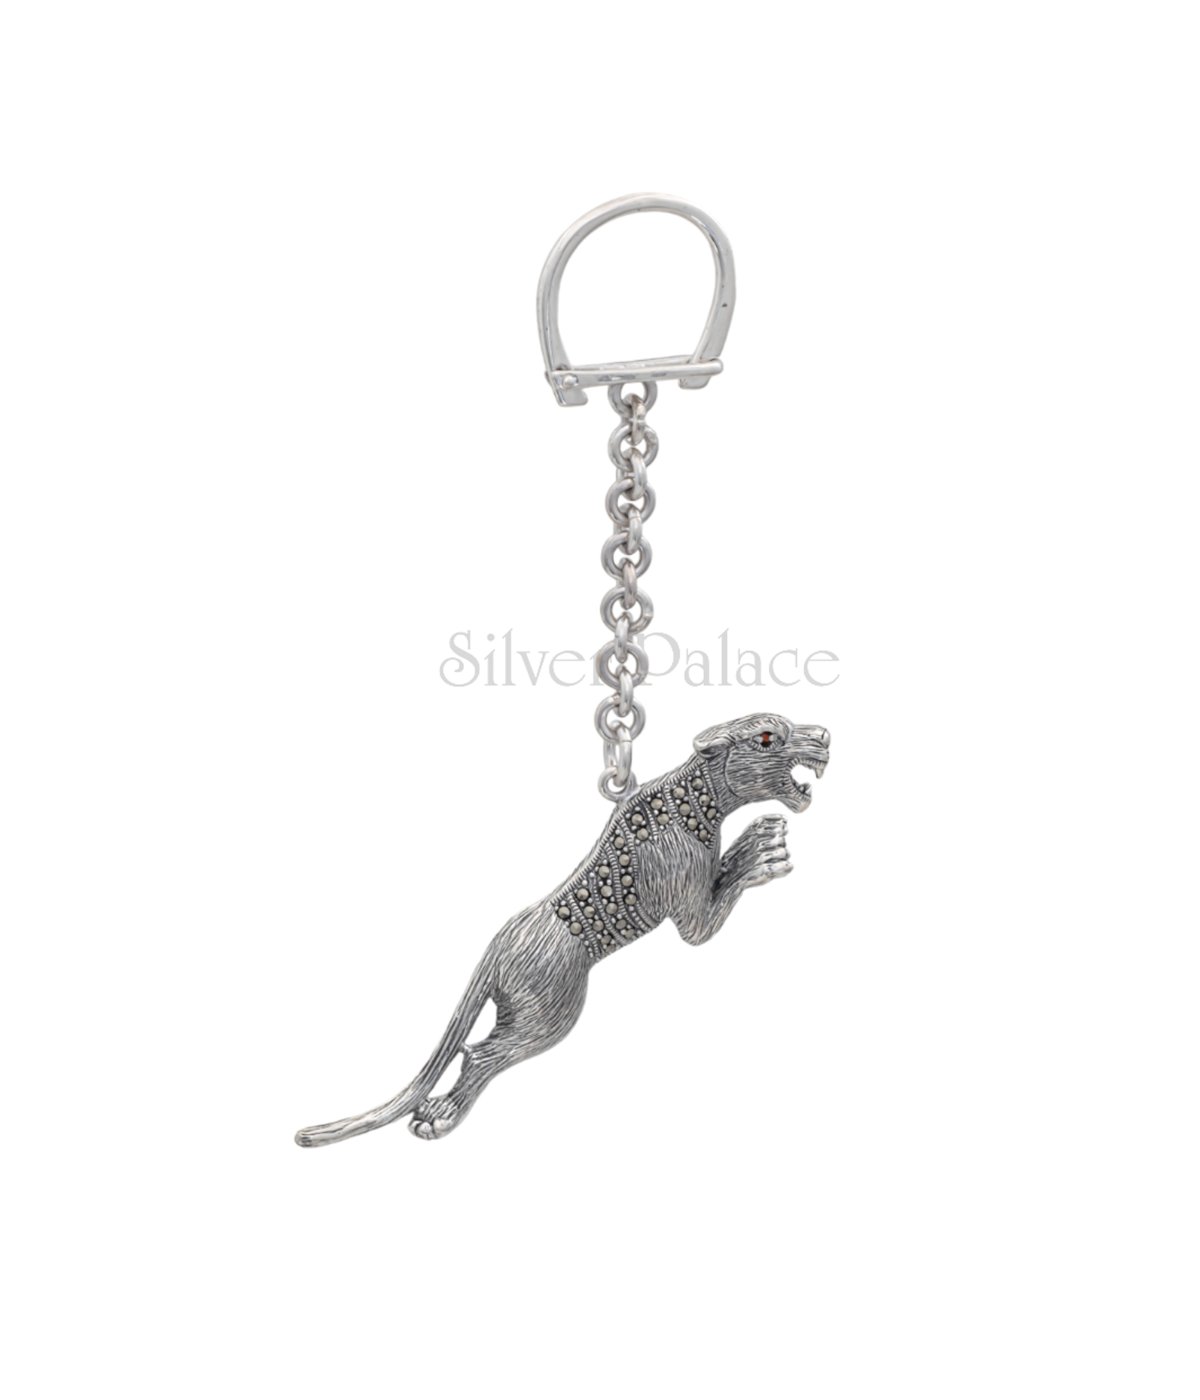 92.5 PURE SILVER LEOPARD KEYCHAIN FOR MEN